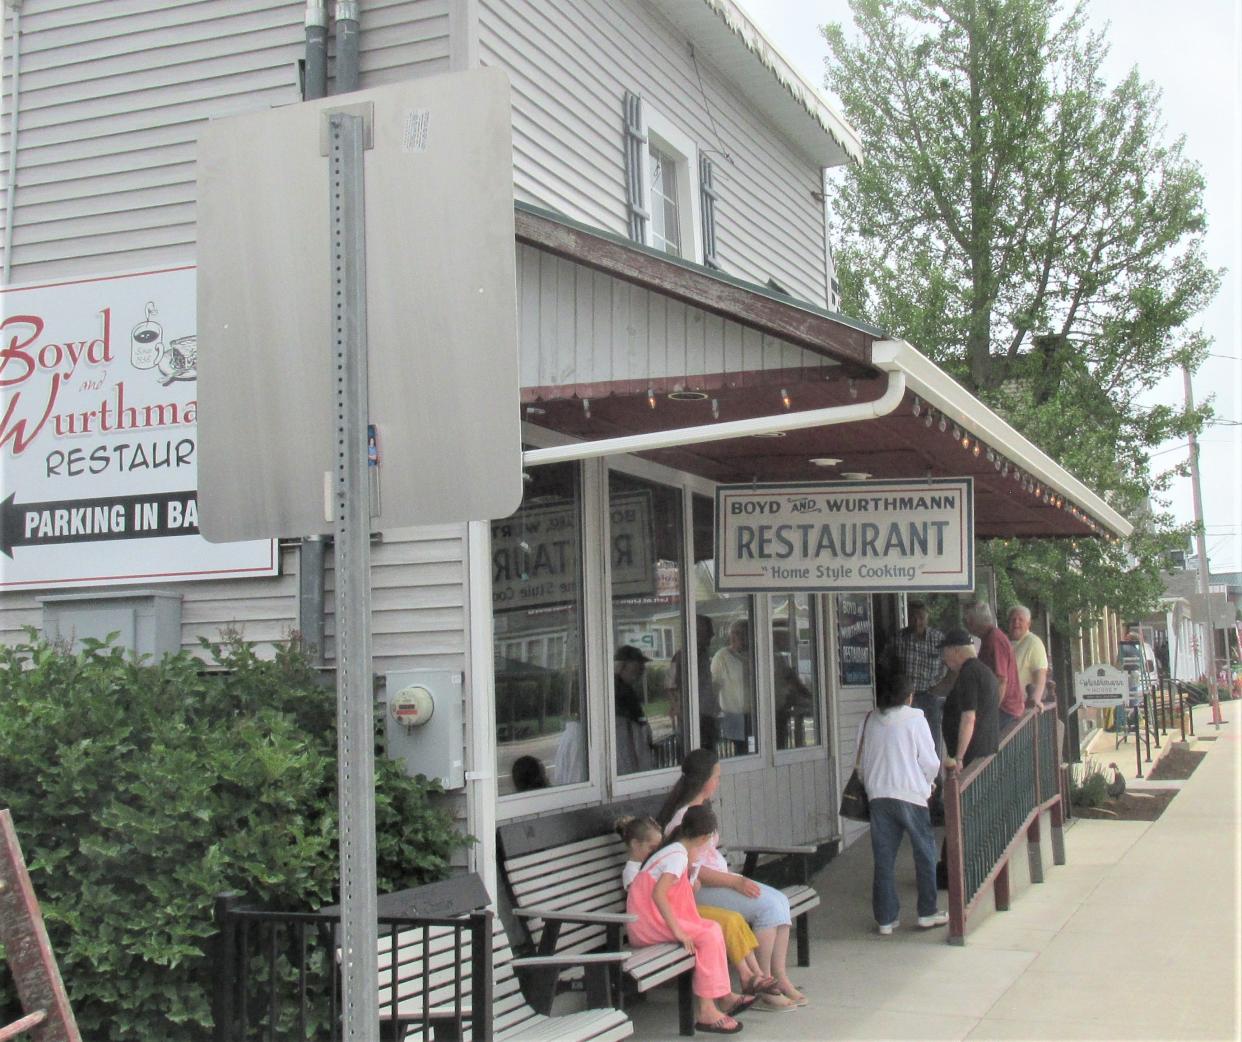 Hungry visitors to Holmes County don't mind waiting in line to dine at Ohio's No. 1 rated diner by Food & Wine magazine, Boyd & Wurthmann Restaurant in Berlin.